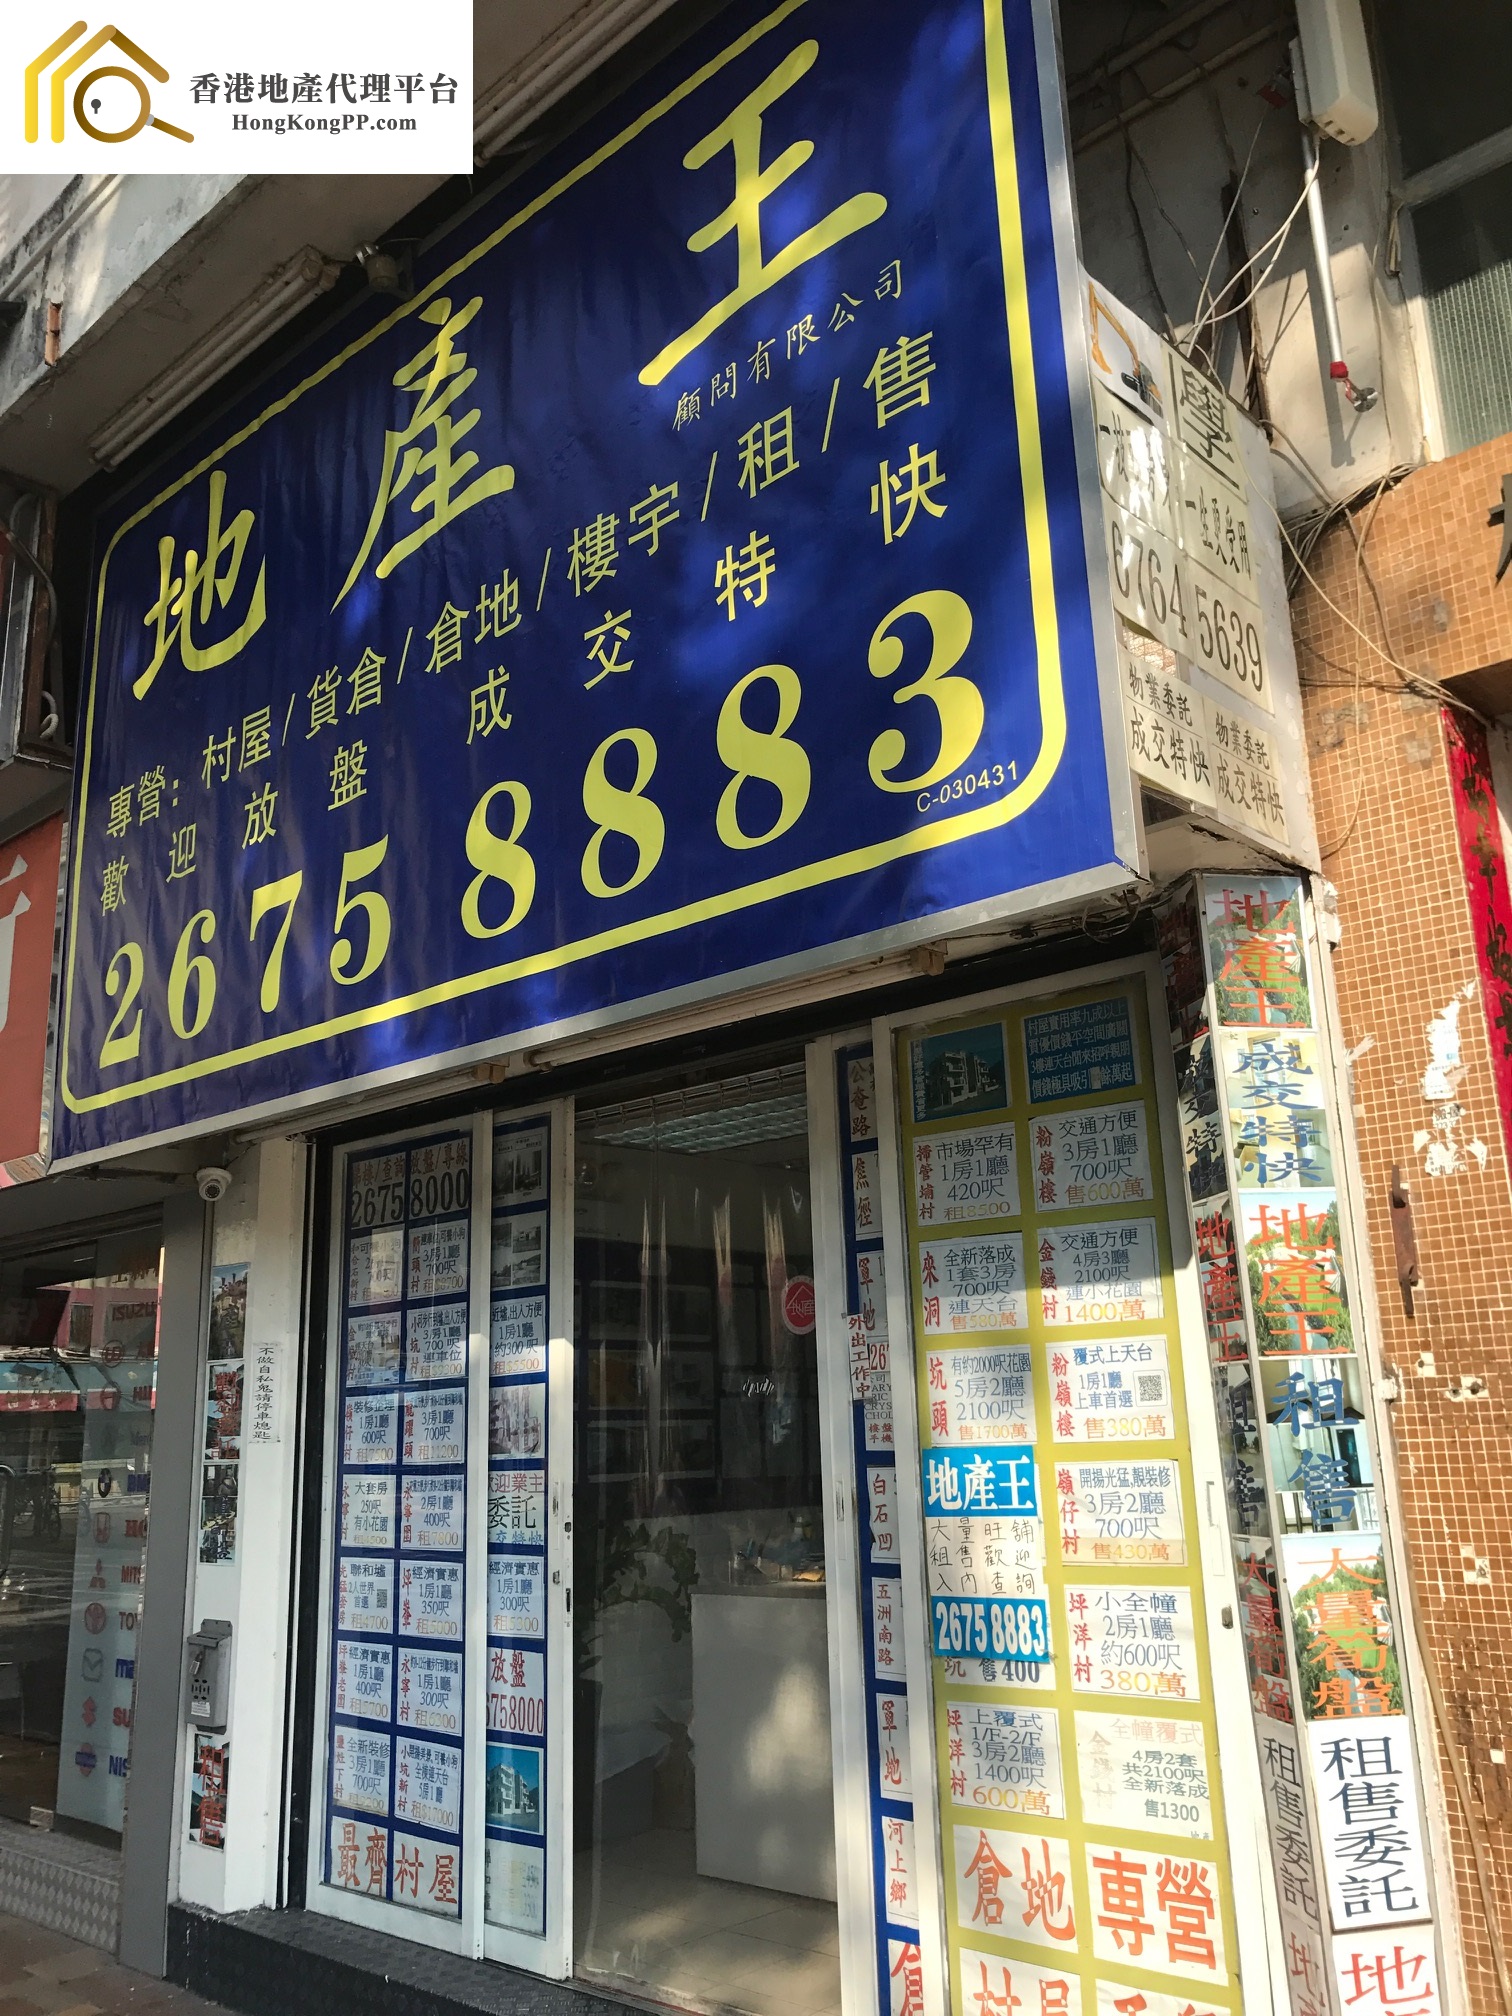 HousingEstate Agent: 地產王 King of Property Consultants